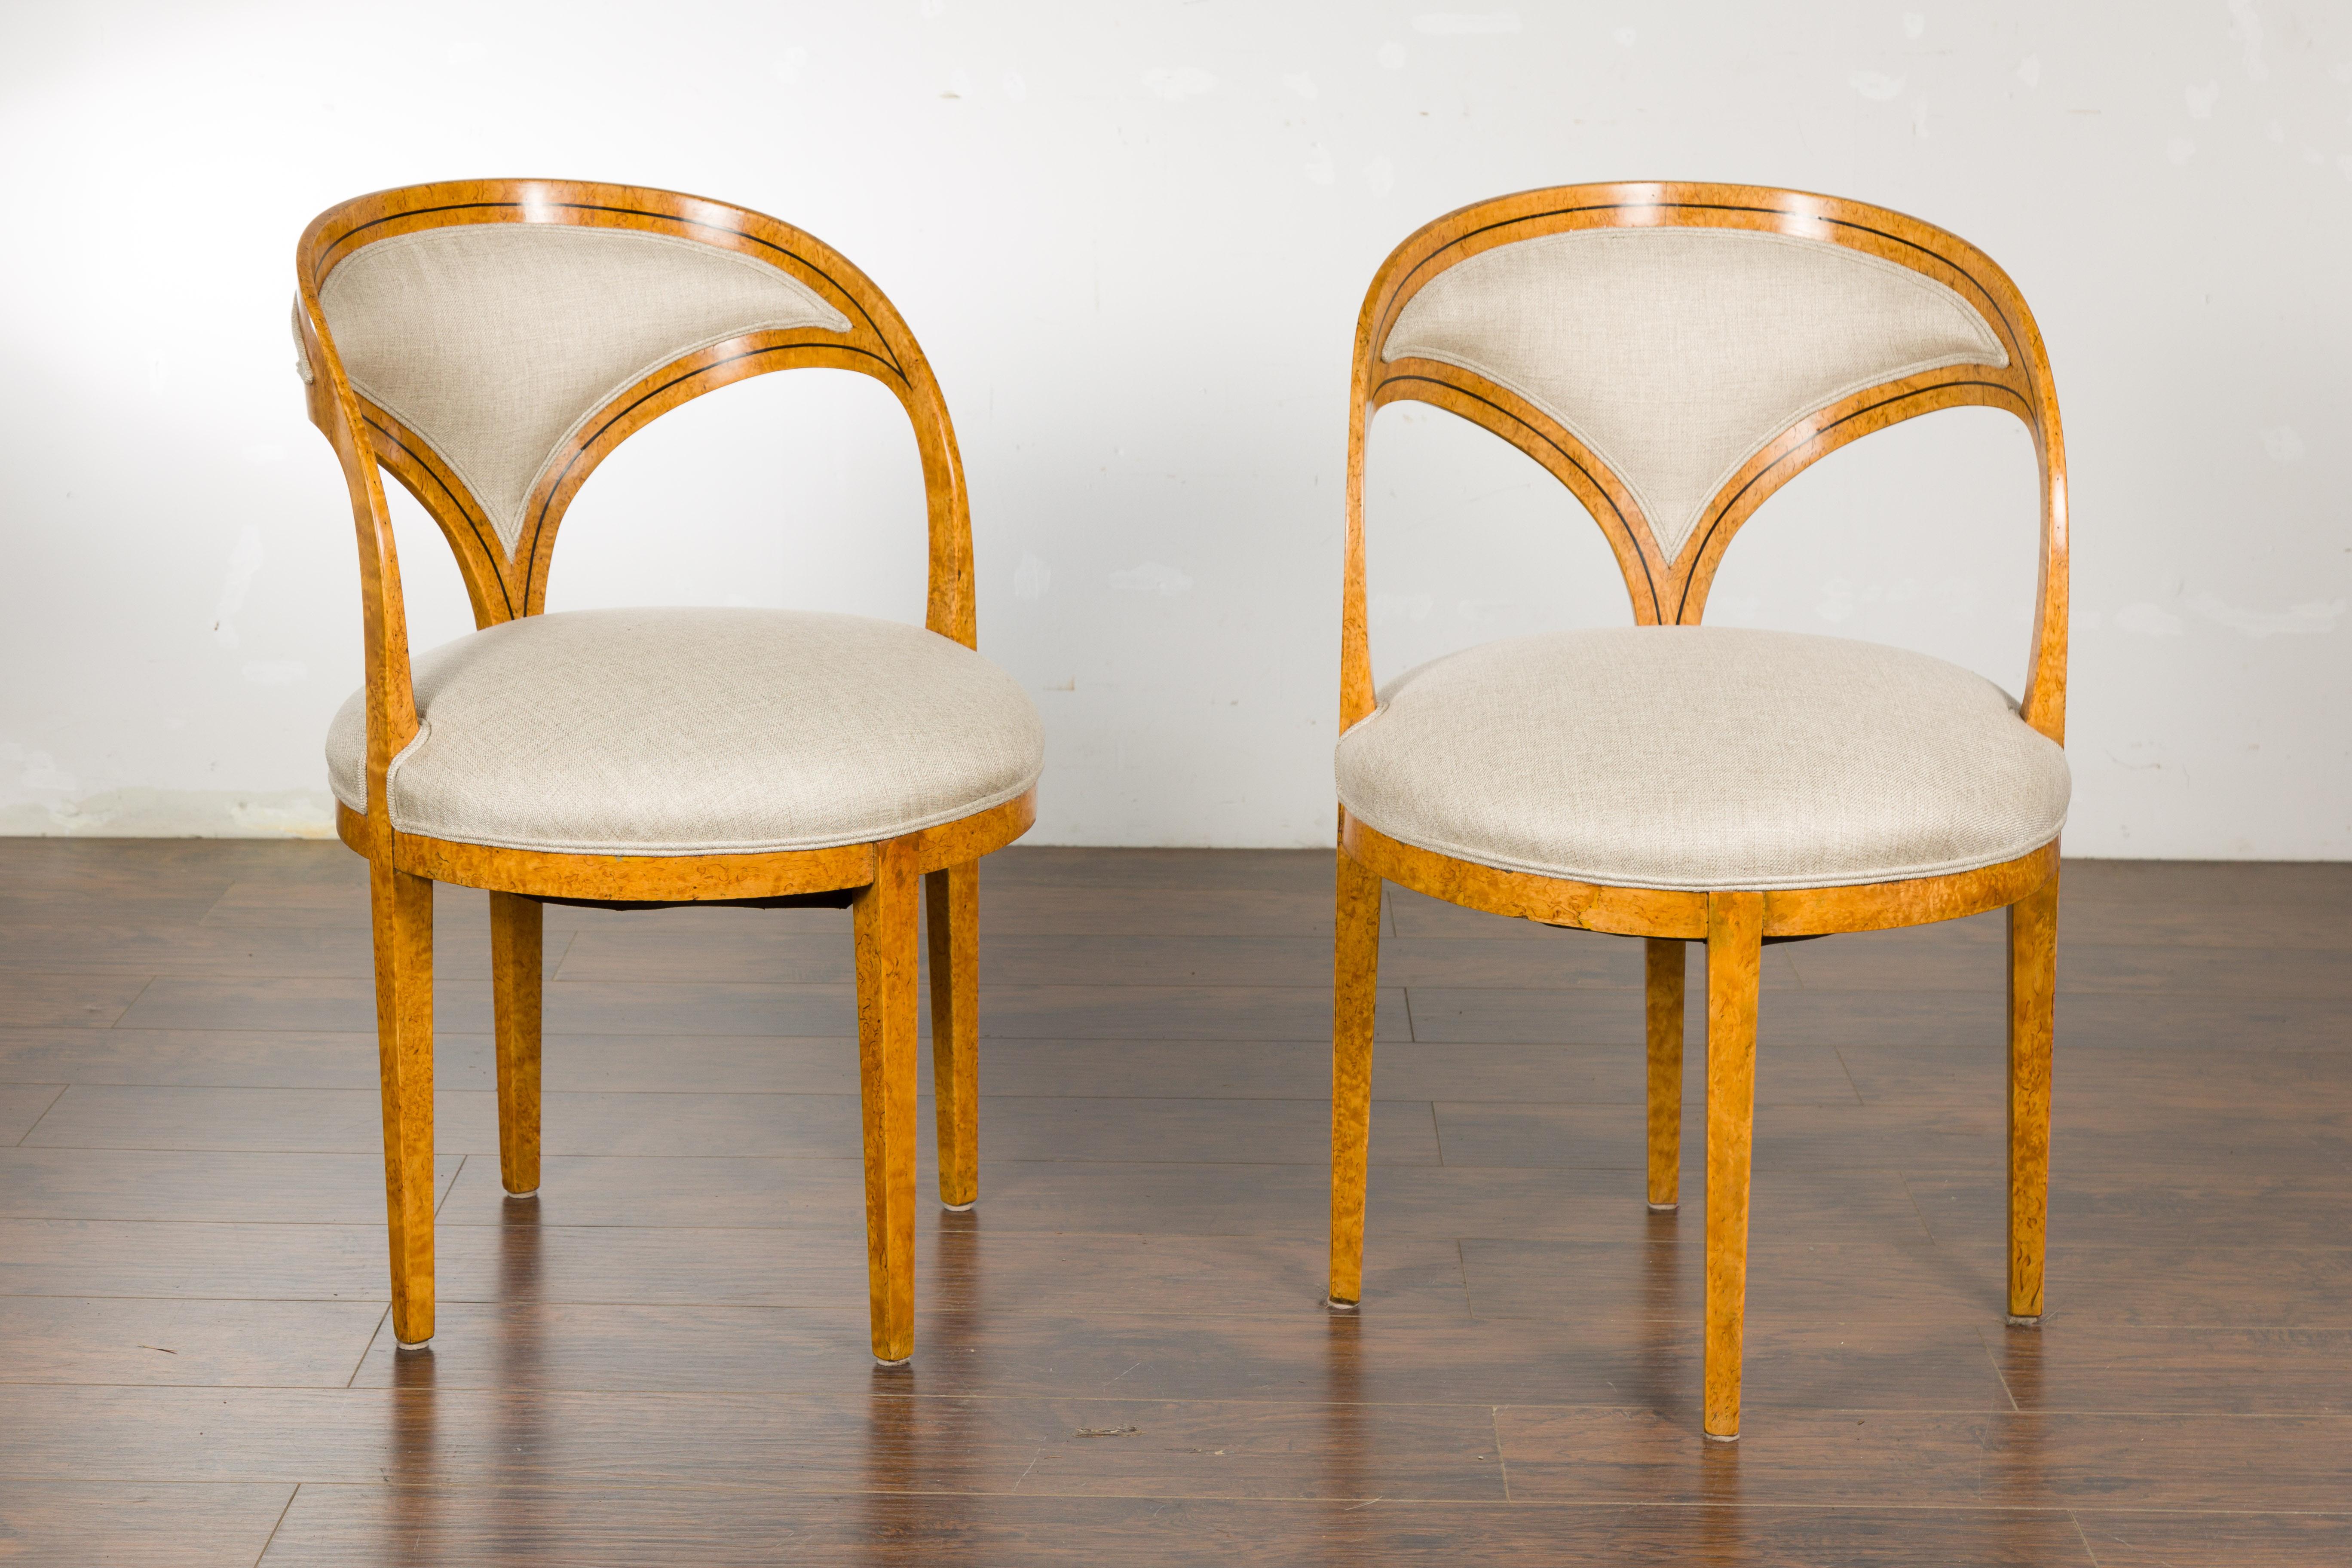 Biedermeier 19th Century Chairs with Ebonized Accents and New Upholstery, a Pair For Sale 7